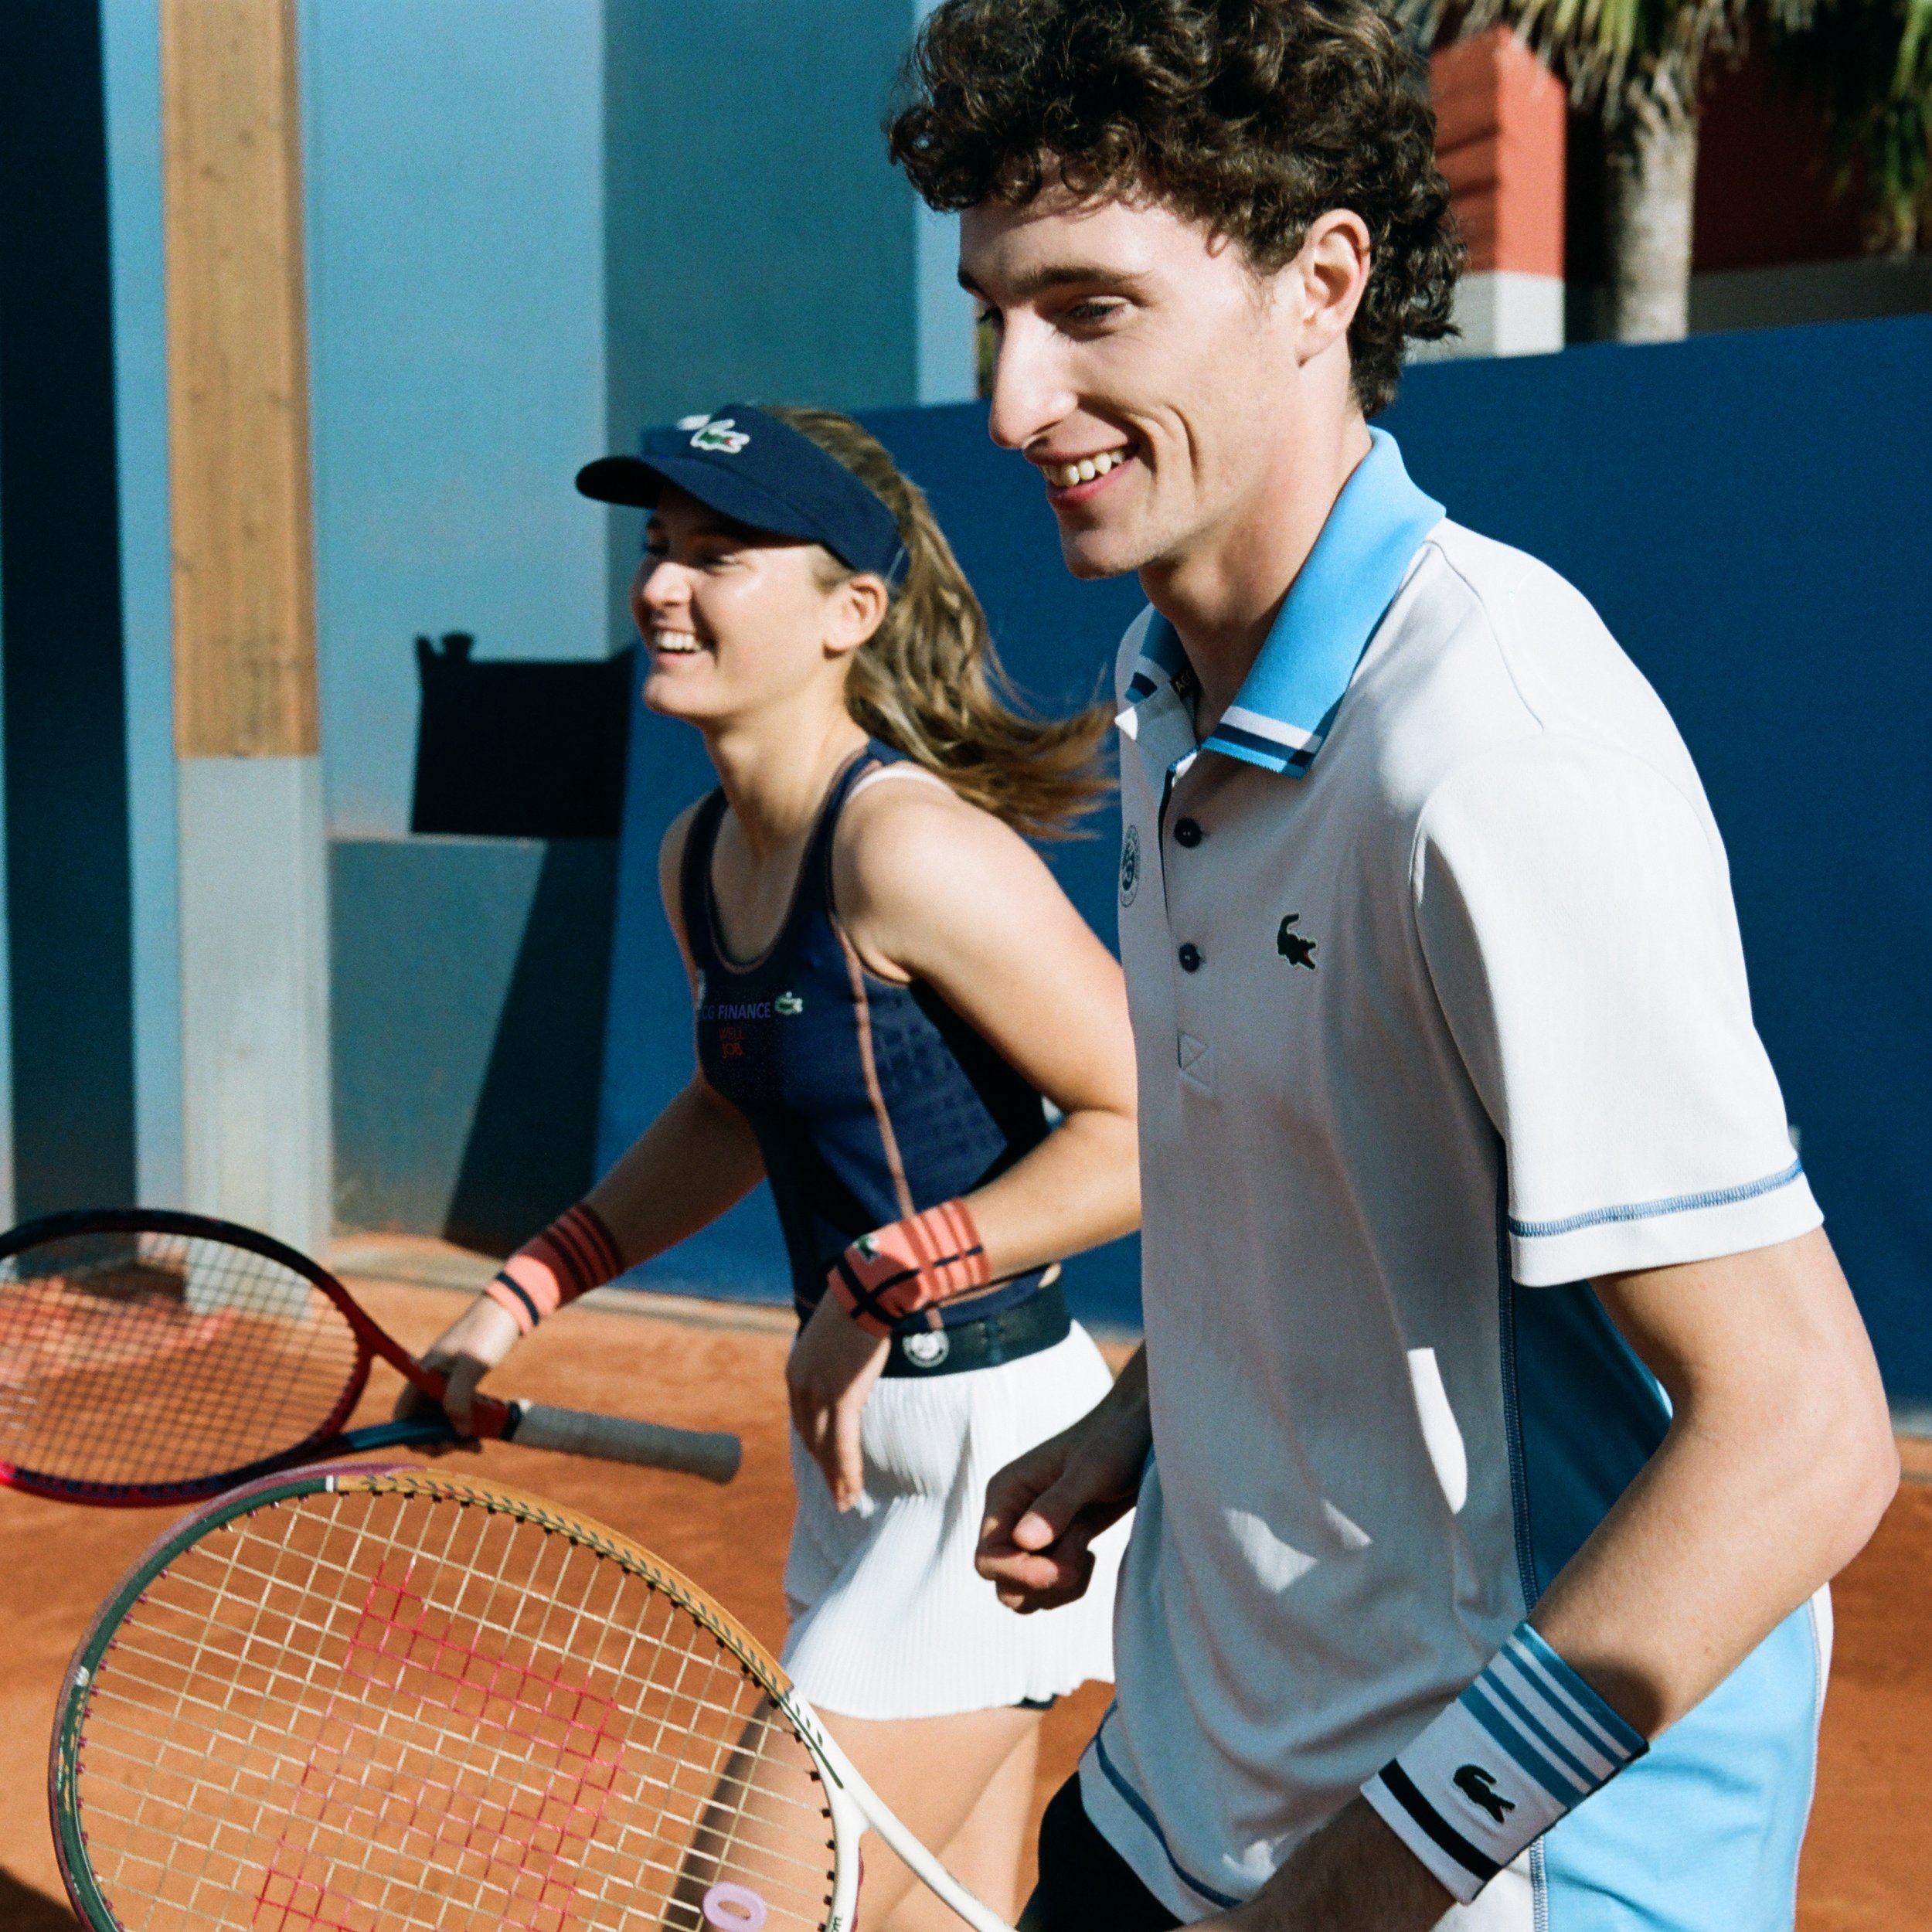 Lacoste Reveal The Creative Series "Apres–Court" To Support The Fashion Vision During Roland-Garros 2022 — SSI Life